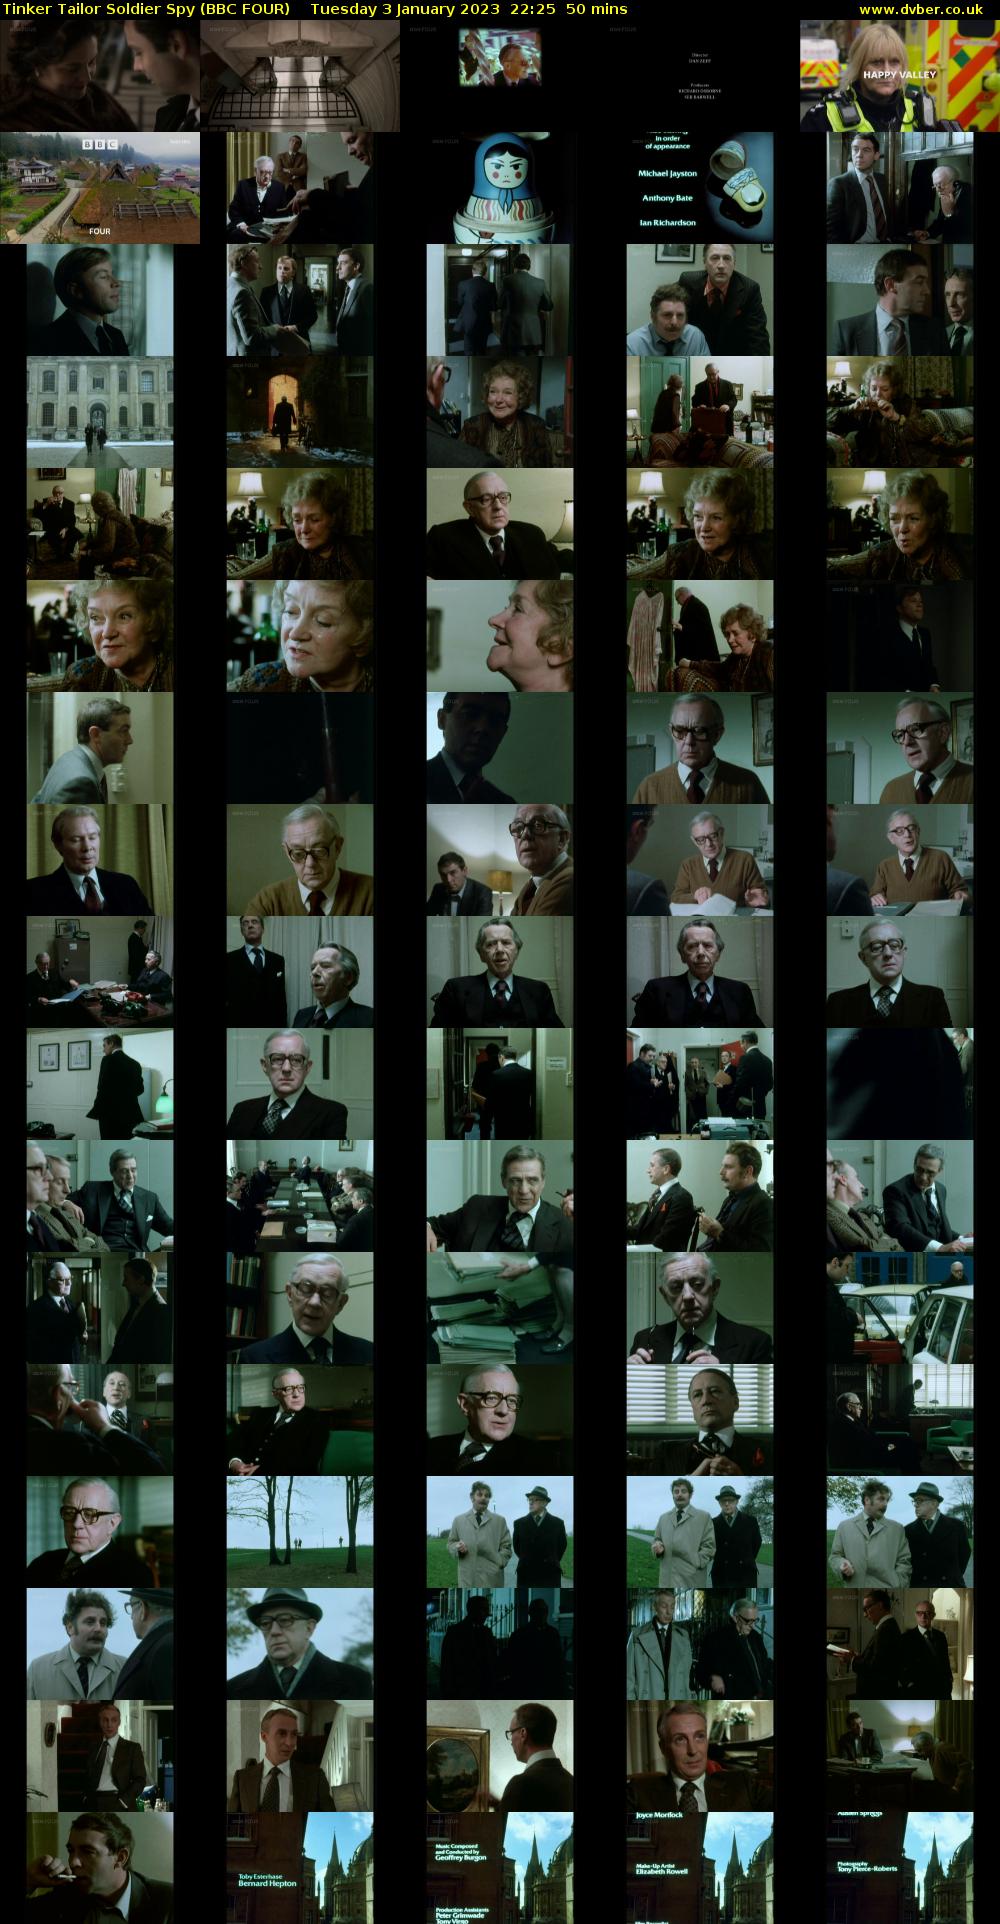 Tinker Tailor Soldier Spy (BBC FOUR) Tuesday 3 January 2023 22:25 - 23:15